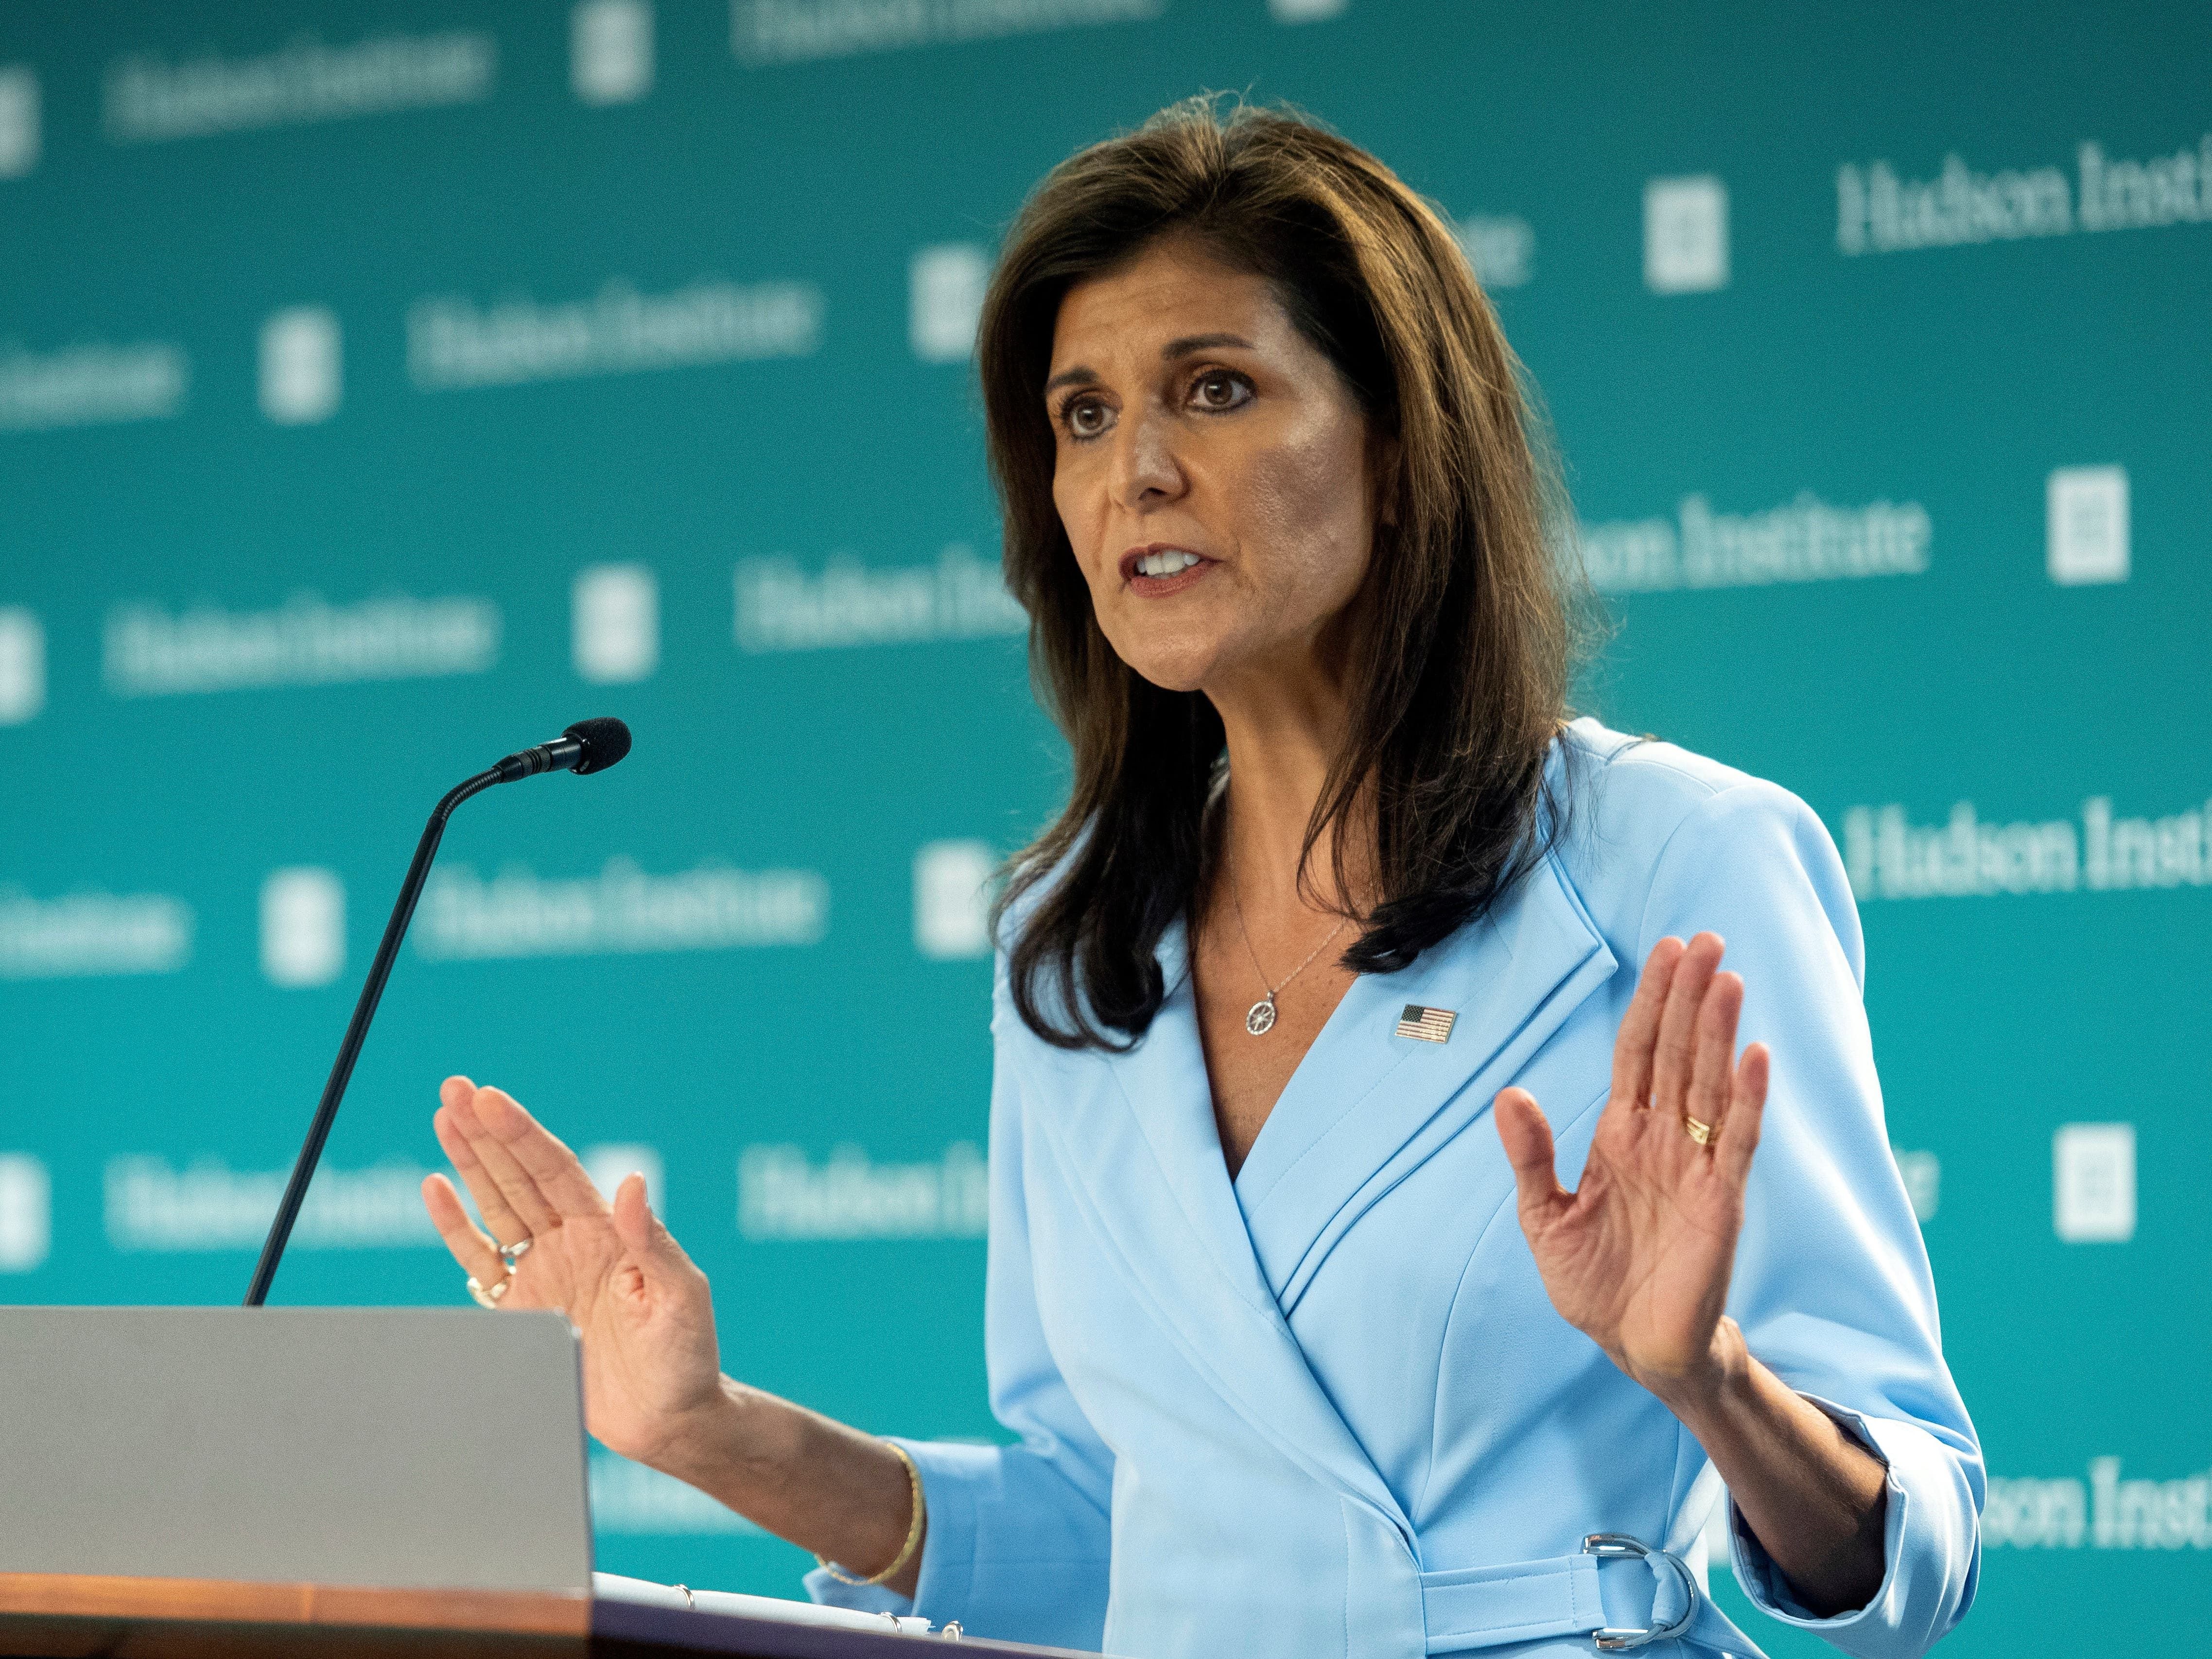 Nikki Haley says she will vote for Donald Trump following their disputes